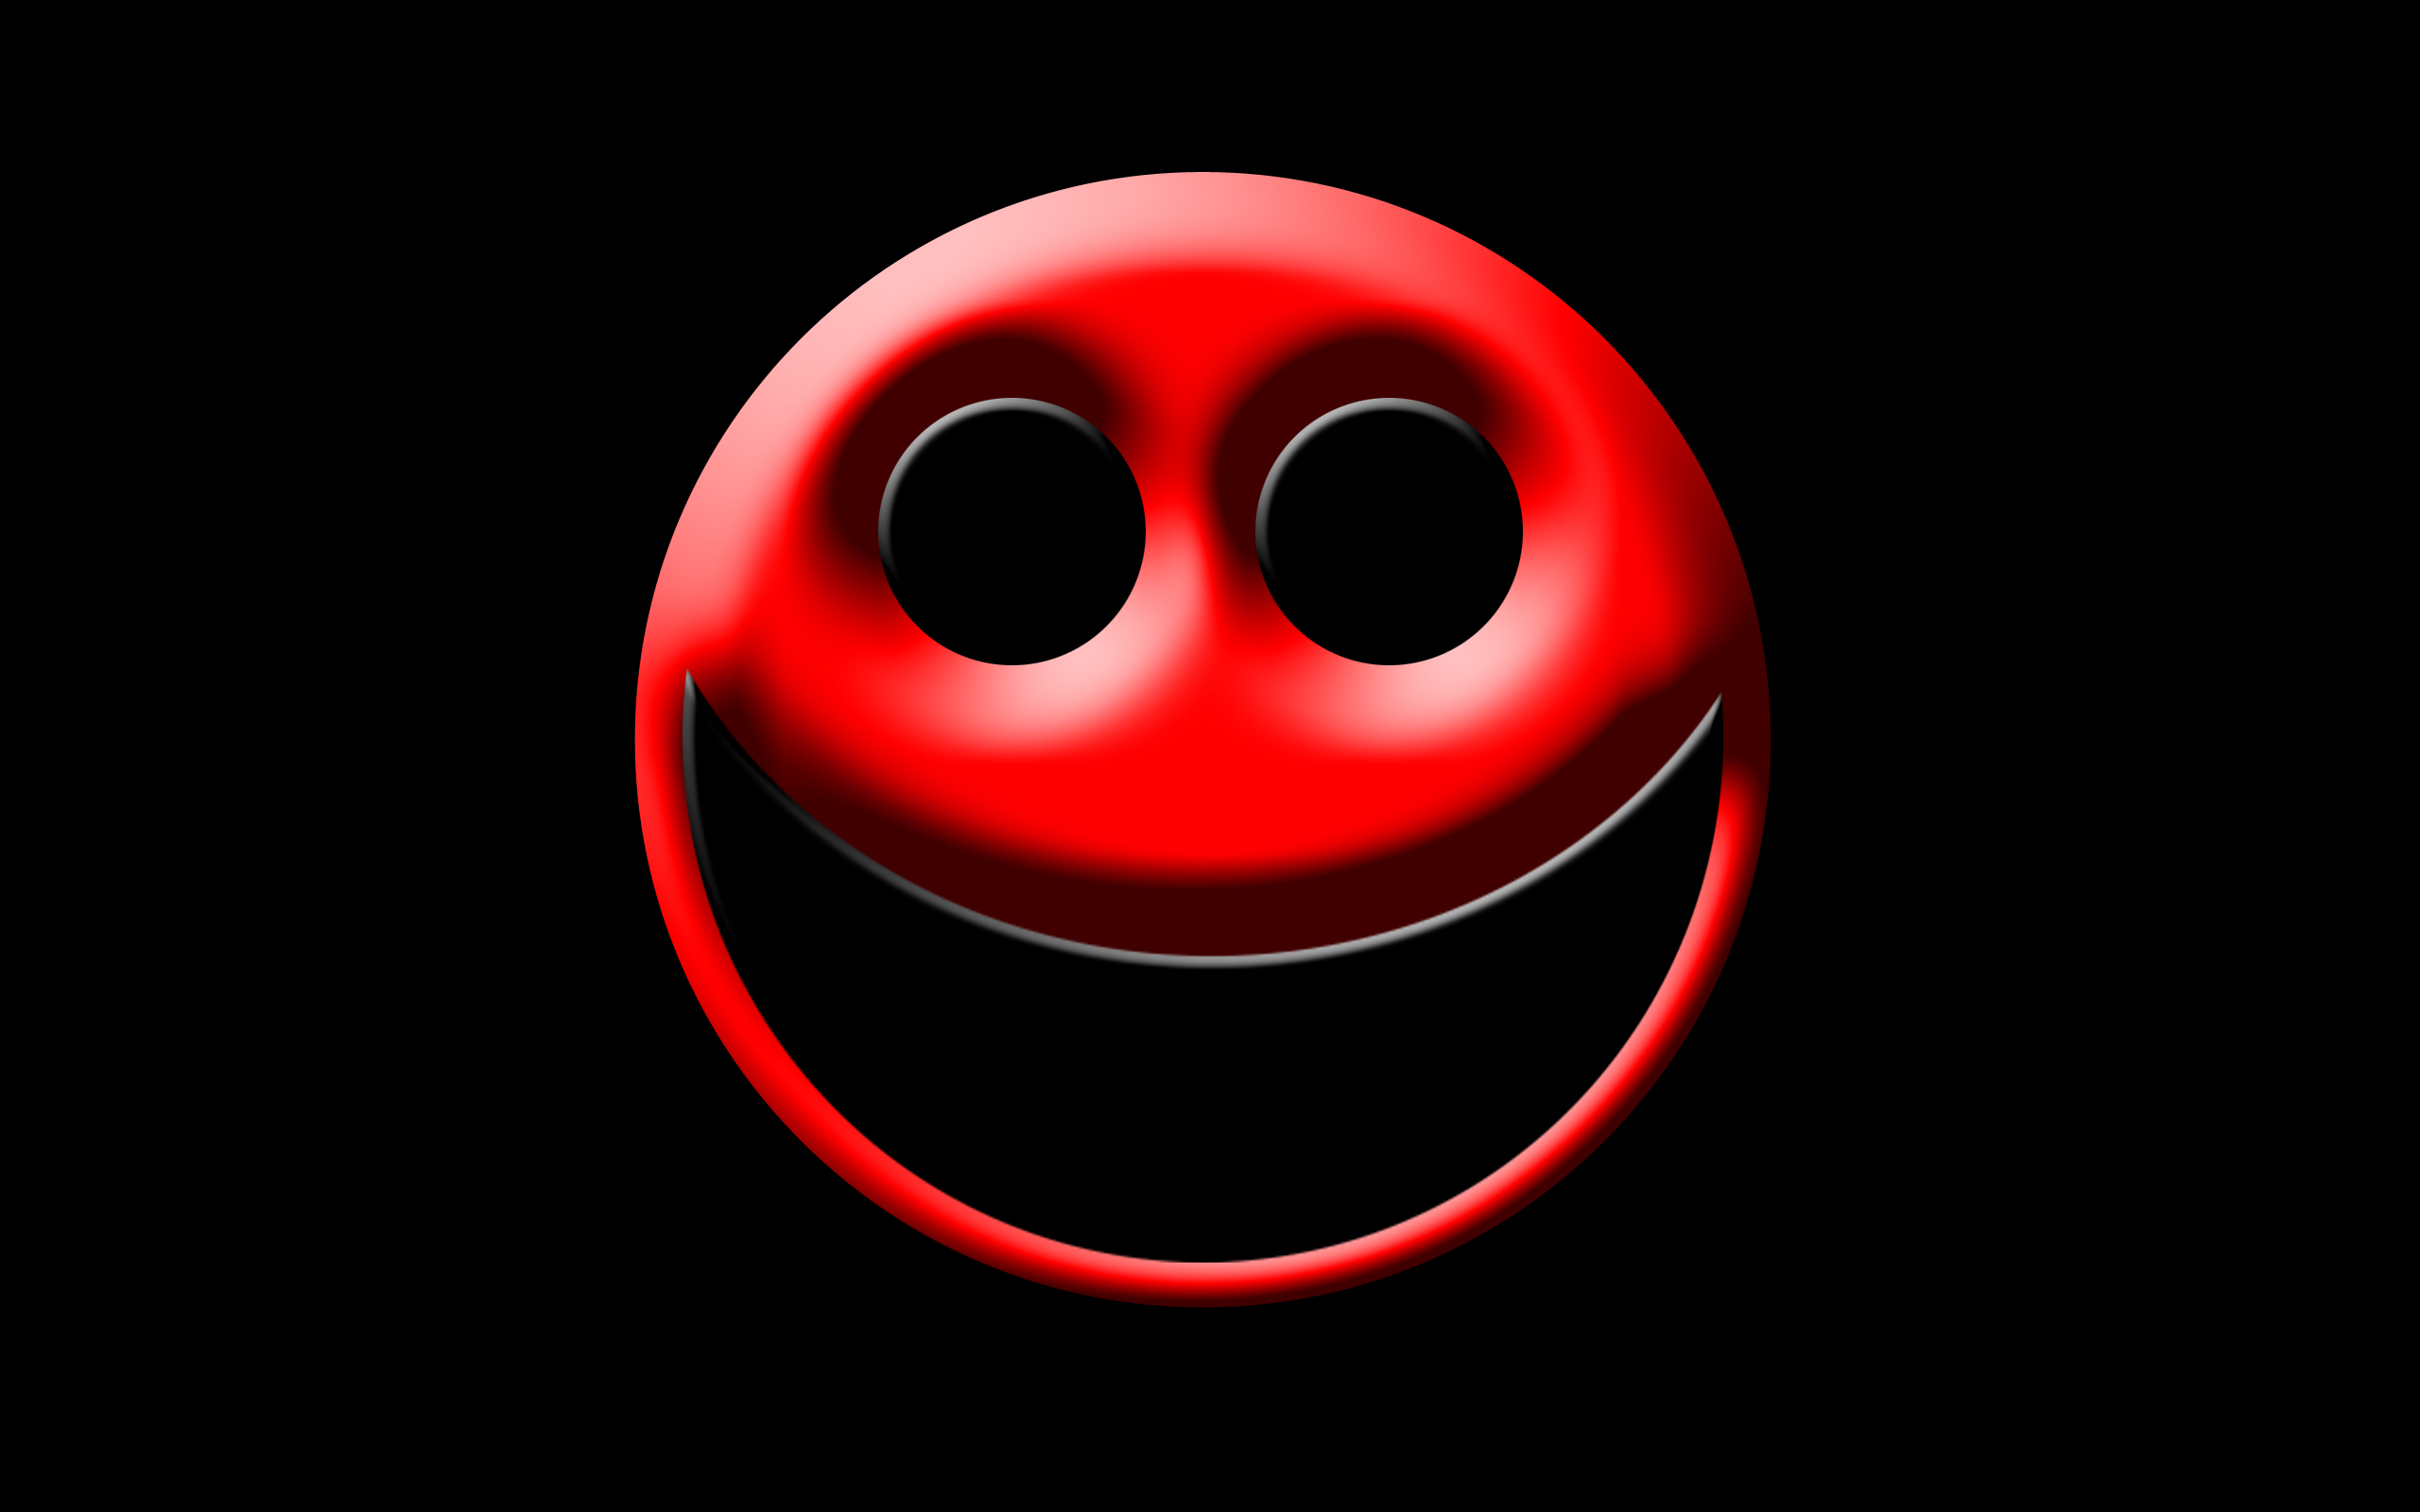 Wallpaper Smiley Red And Black